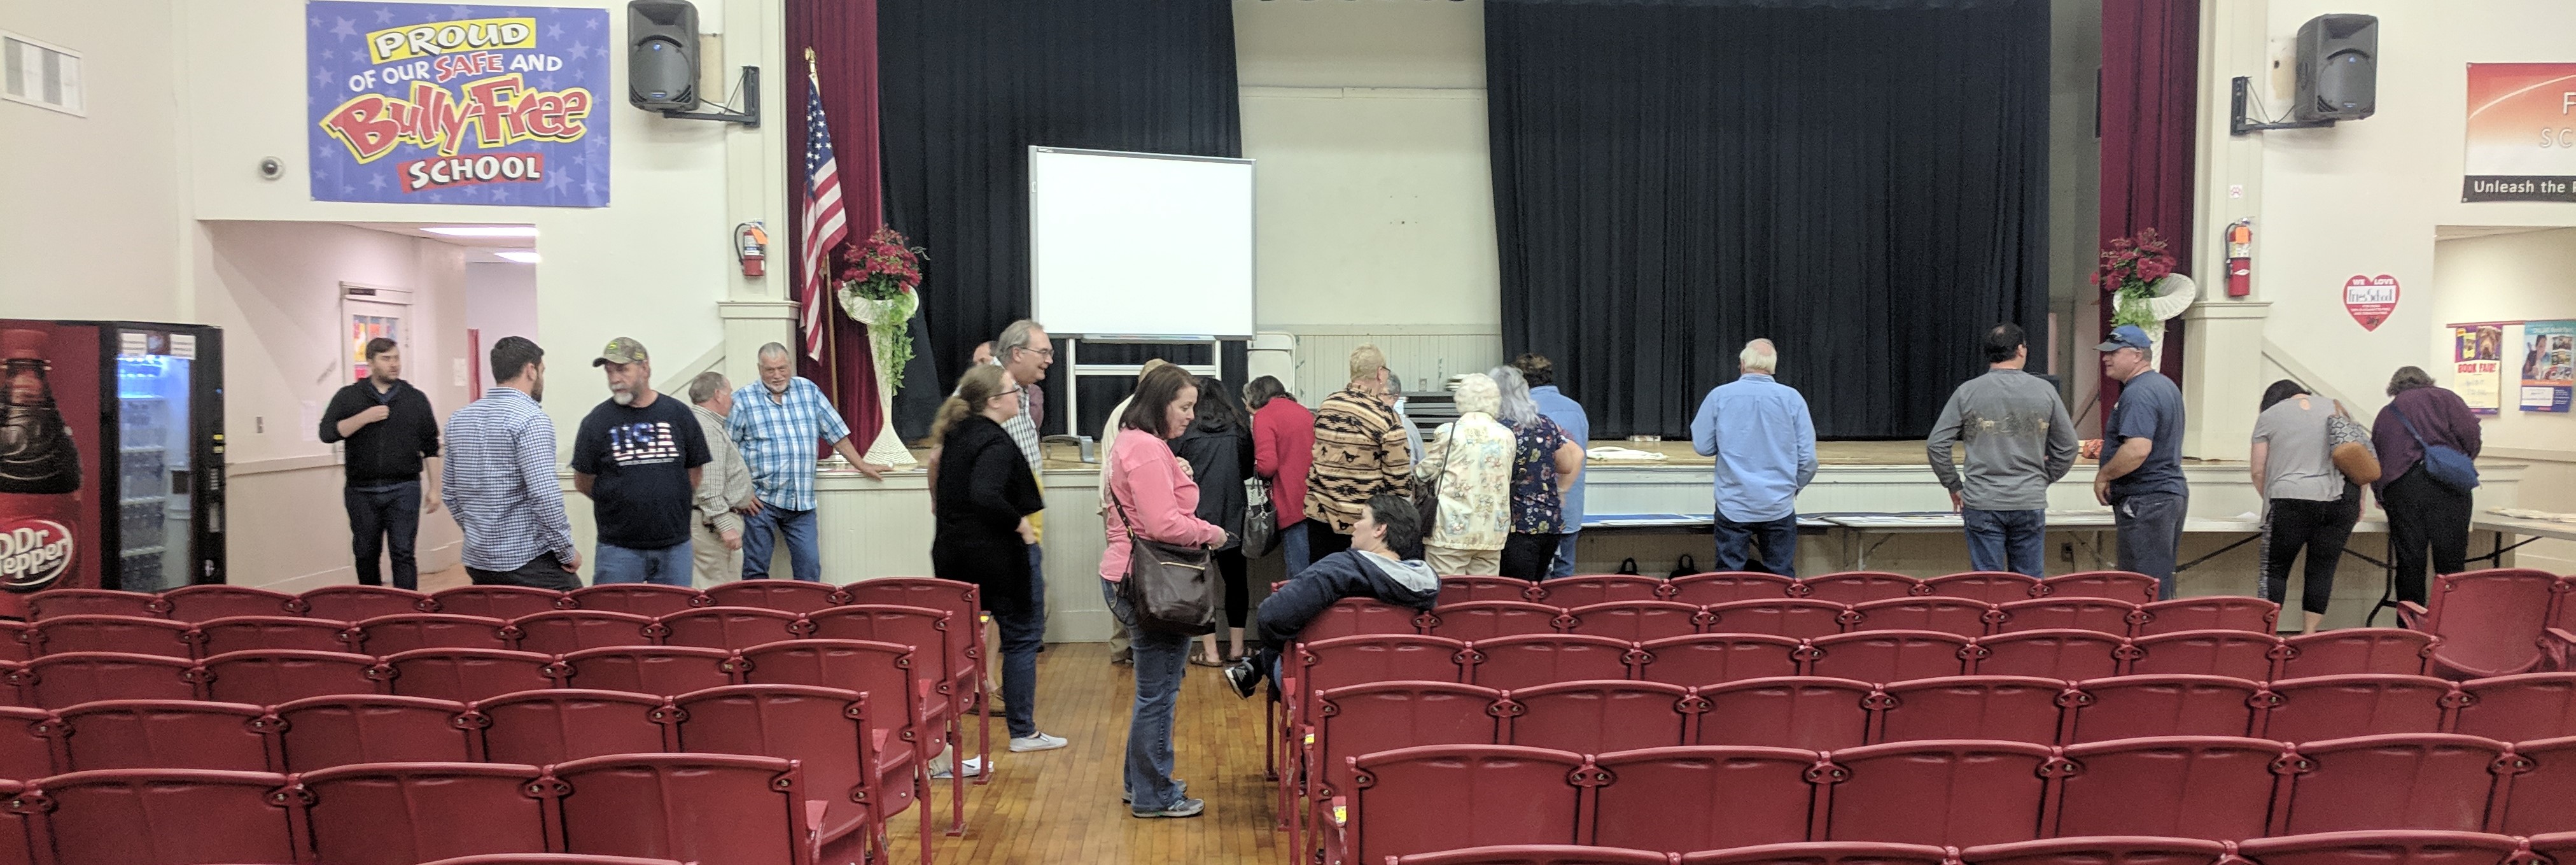 A line of people in front of the stage in a middle school auditorium talk to each other and look at copies of historical documents. Red auditorium seating fills the foreground.